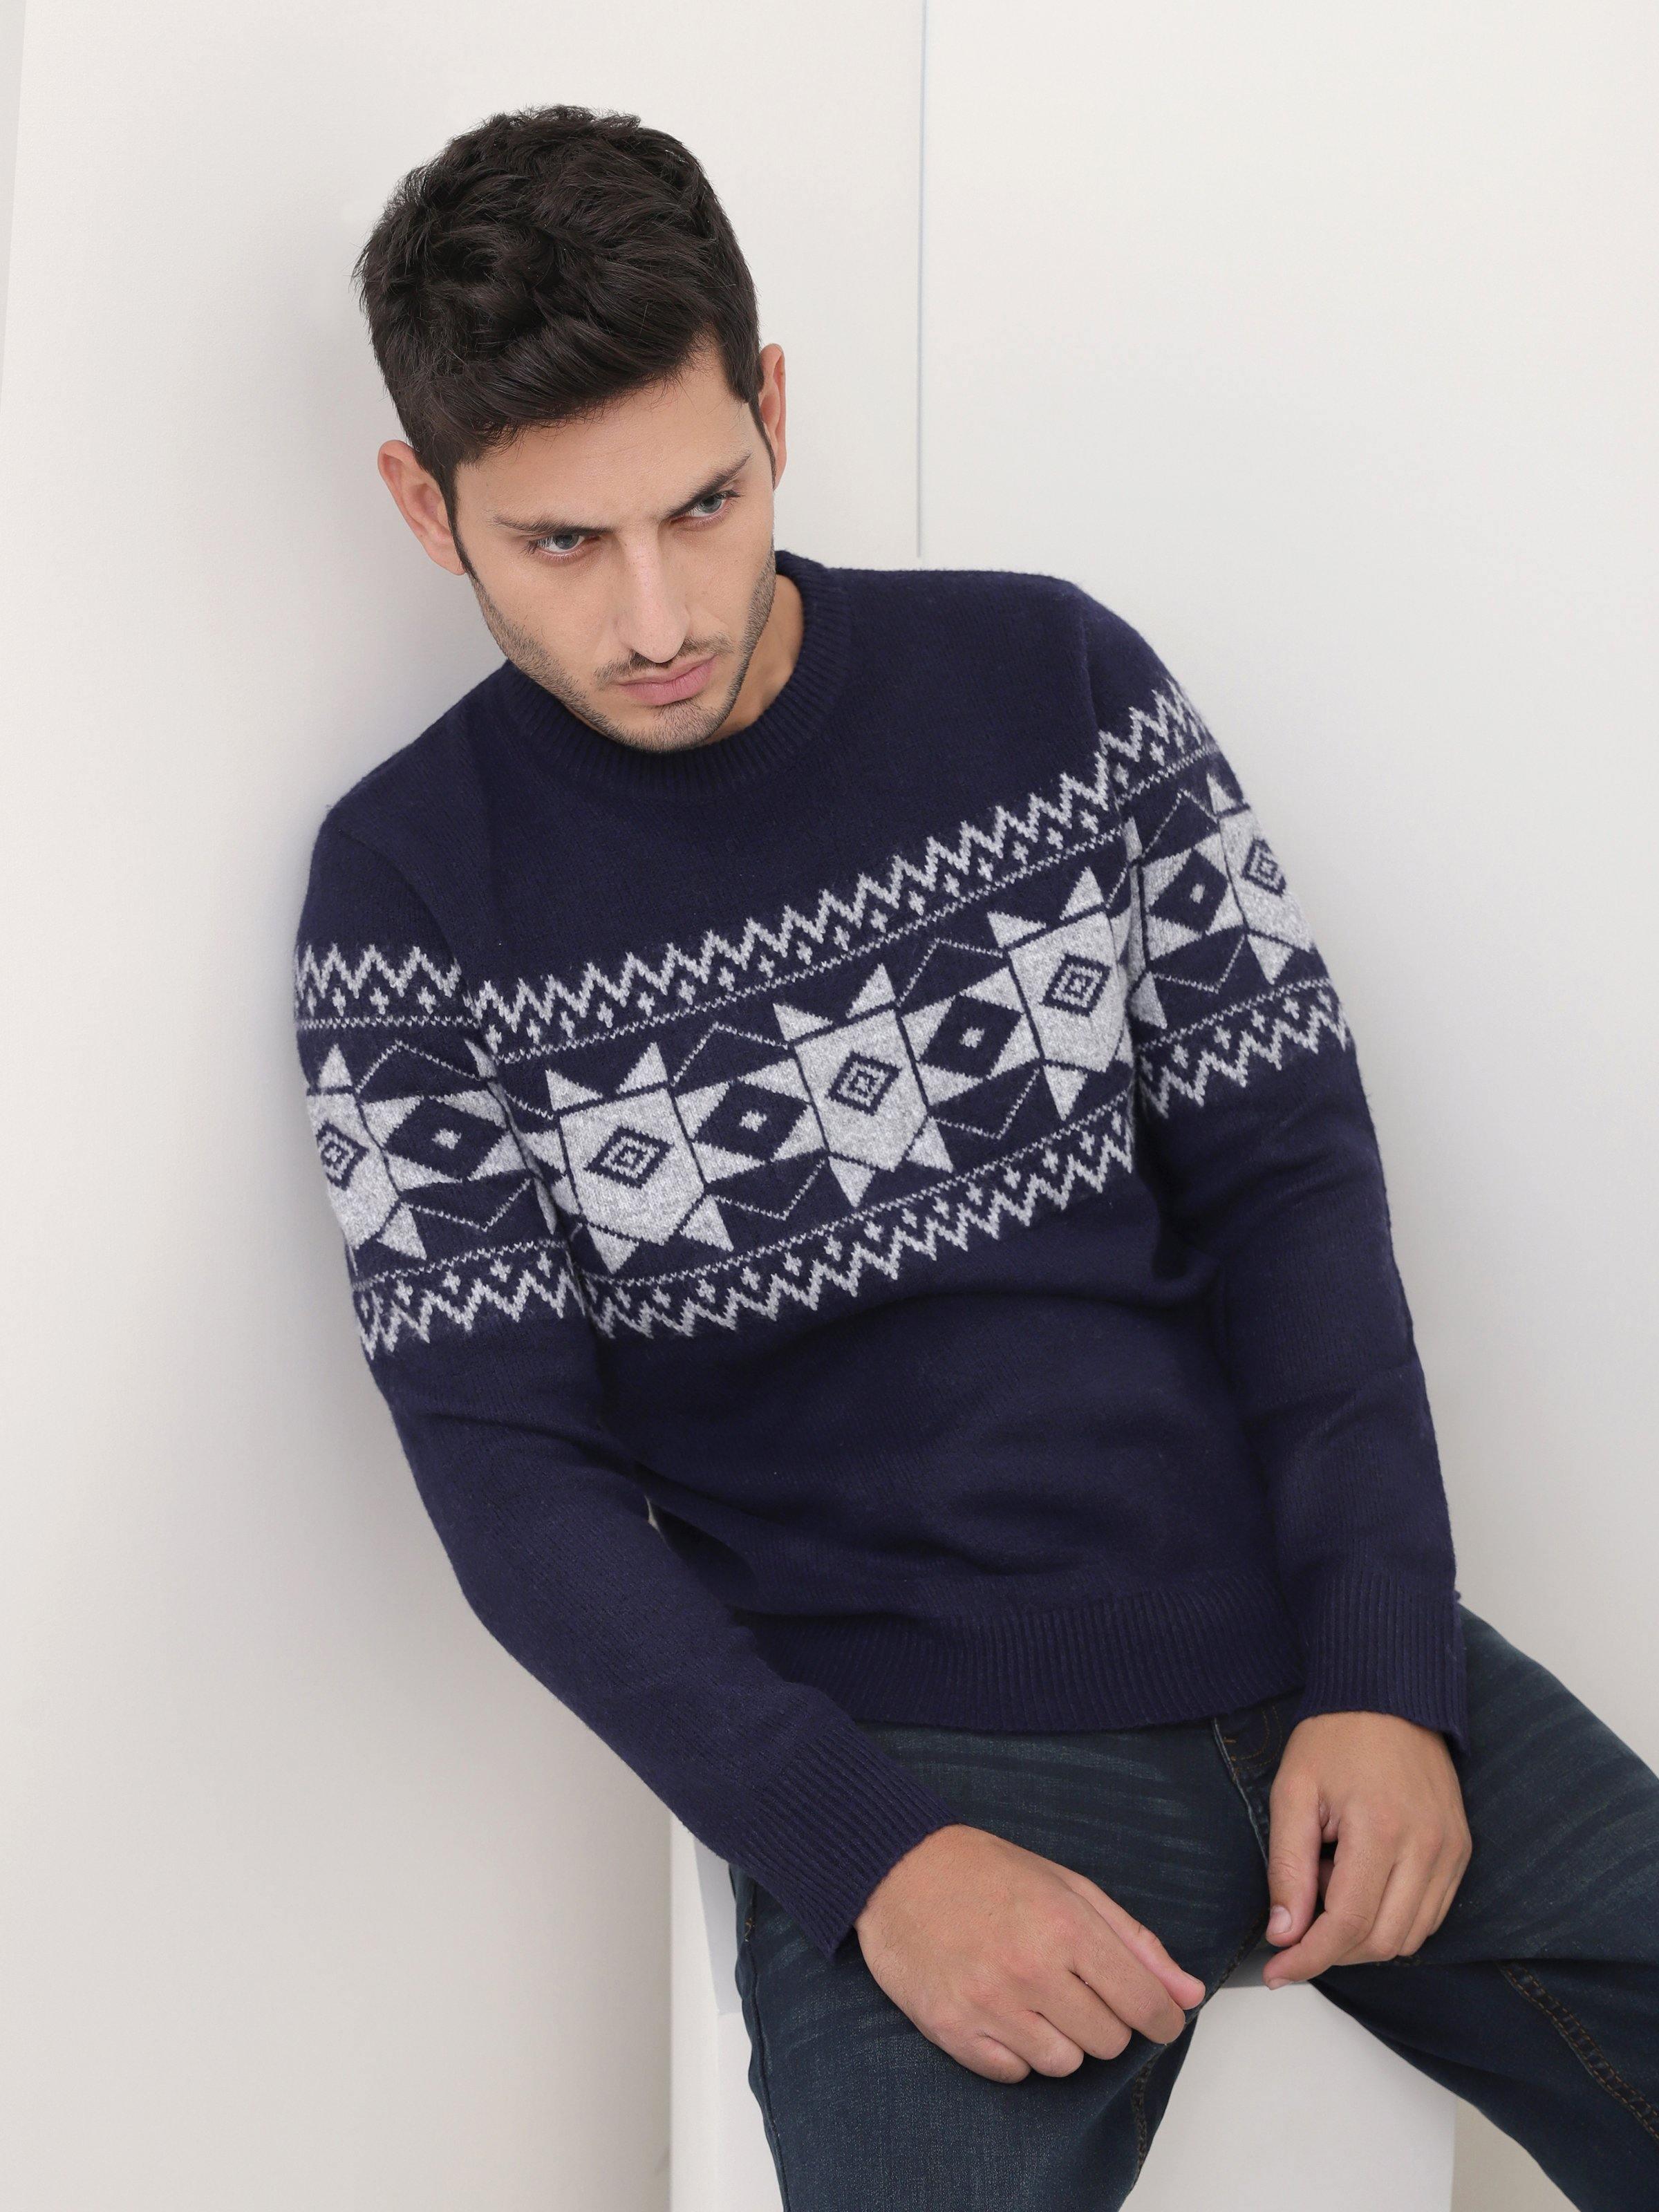 SWEATER ROUND NECK FULL SLEEVE NAVY GREY at Charcoal Clothing